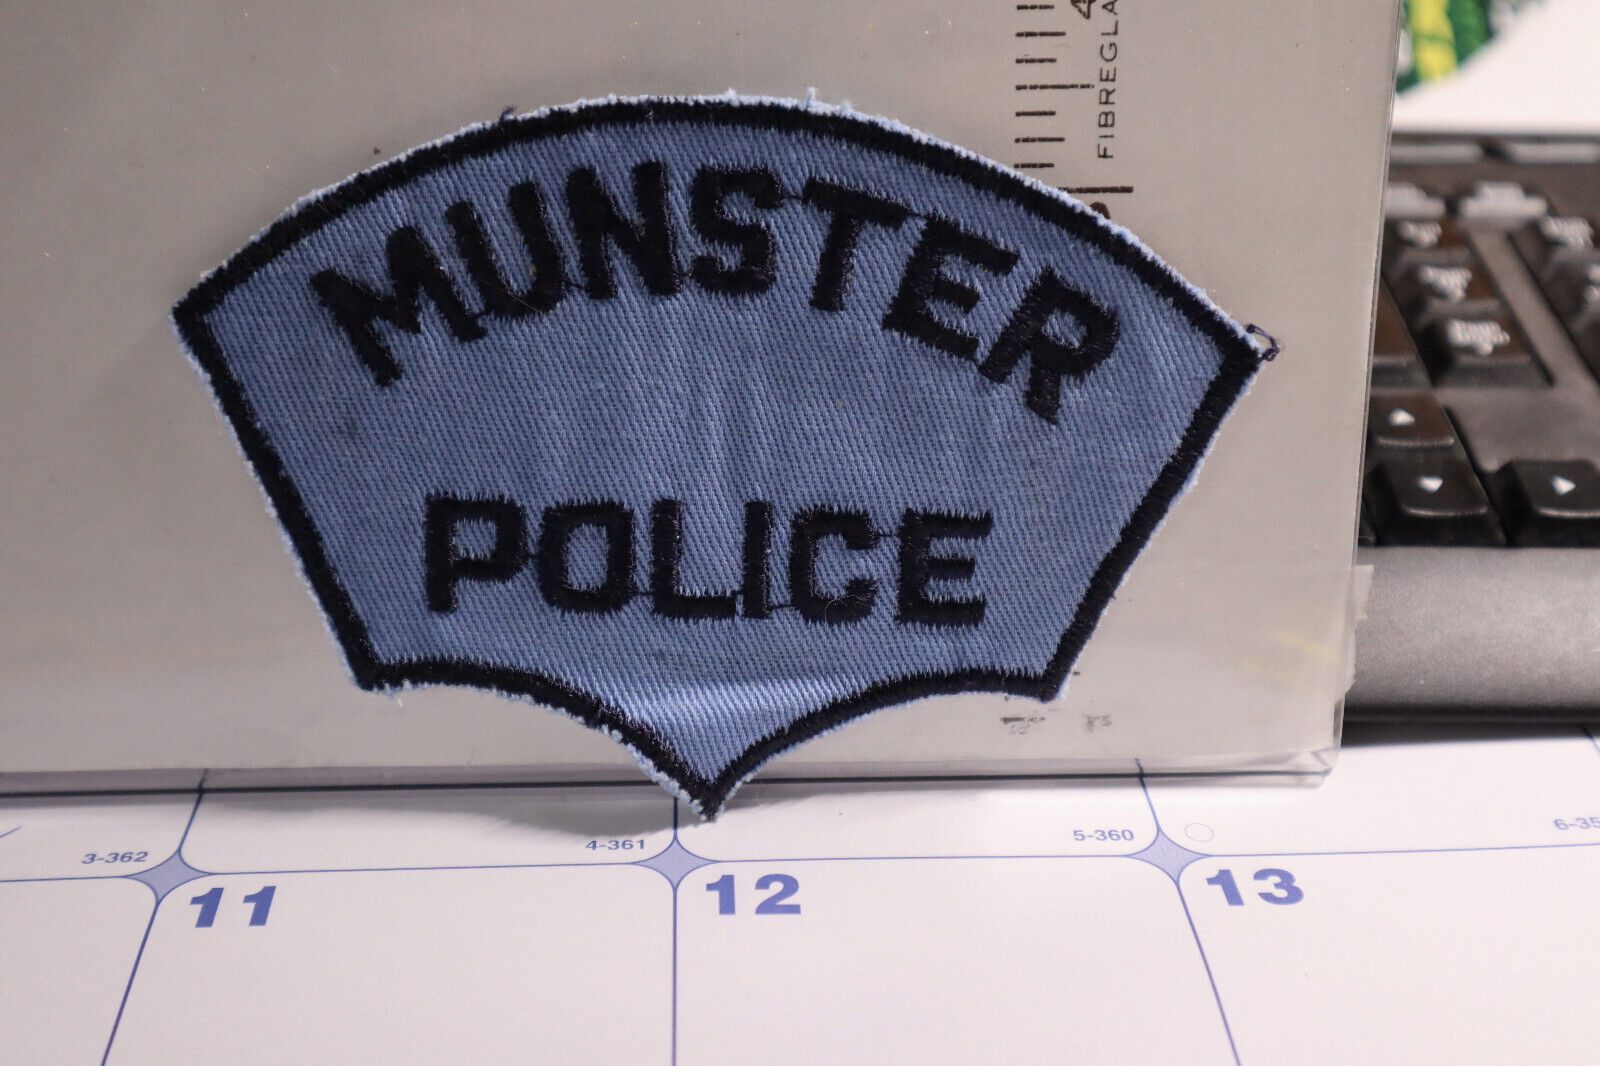 Police Patch   Munster Police Indiana